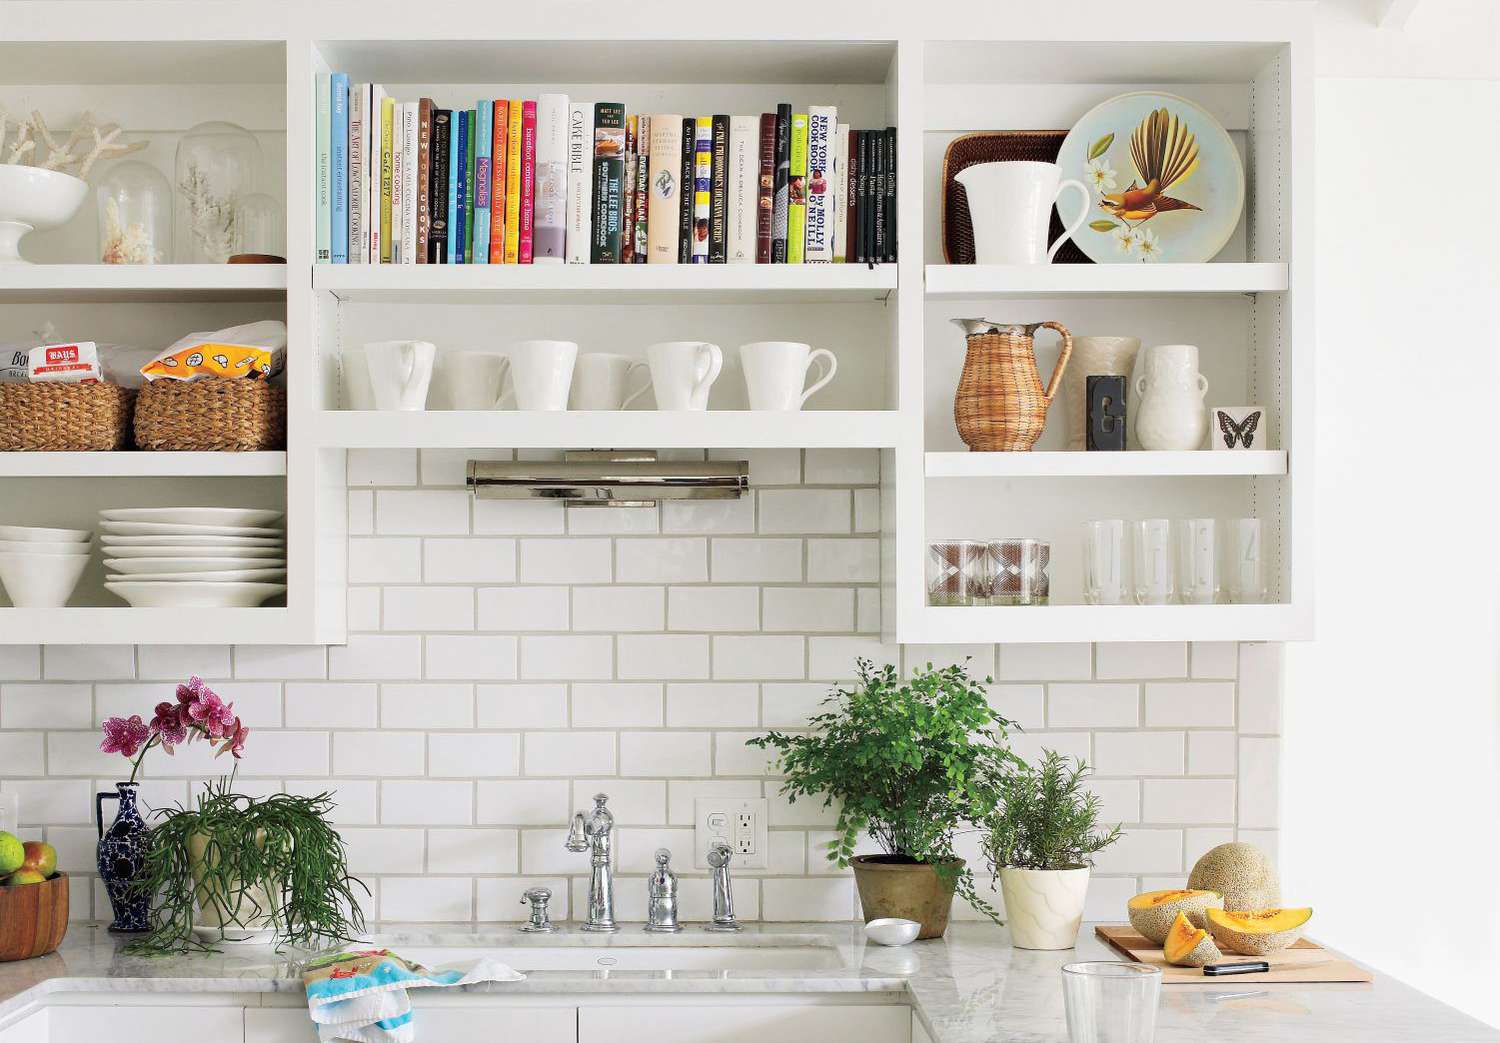 How To Store Cookbooks In Kitchen